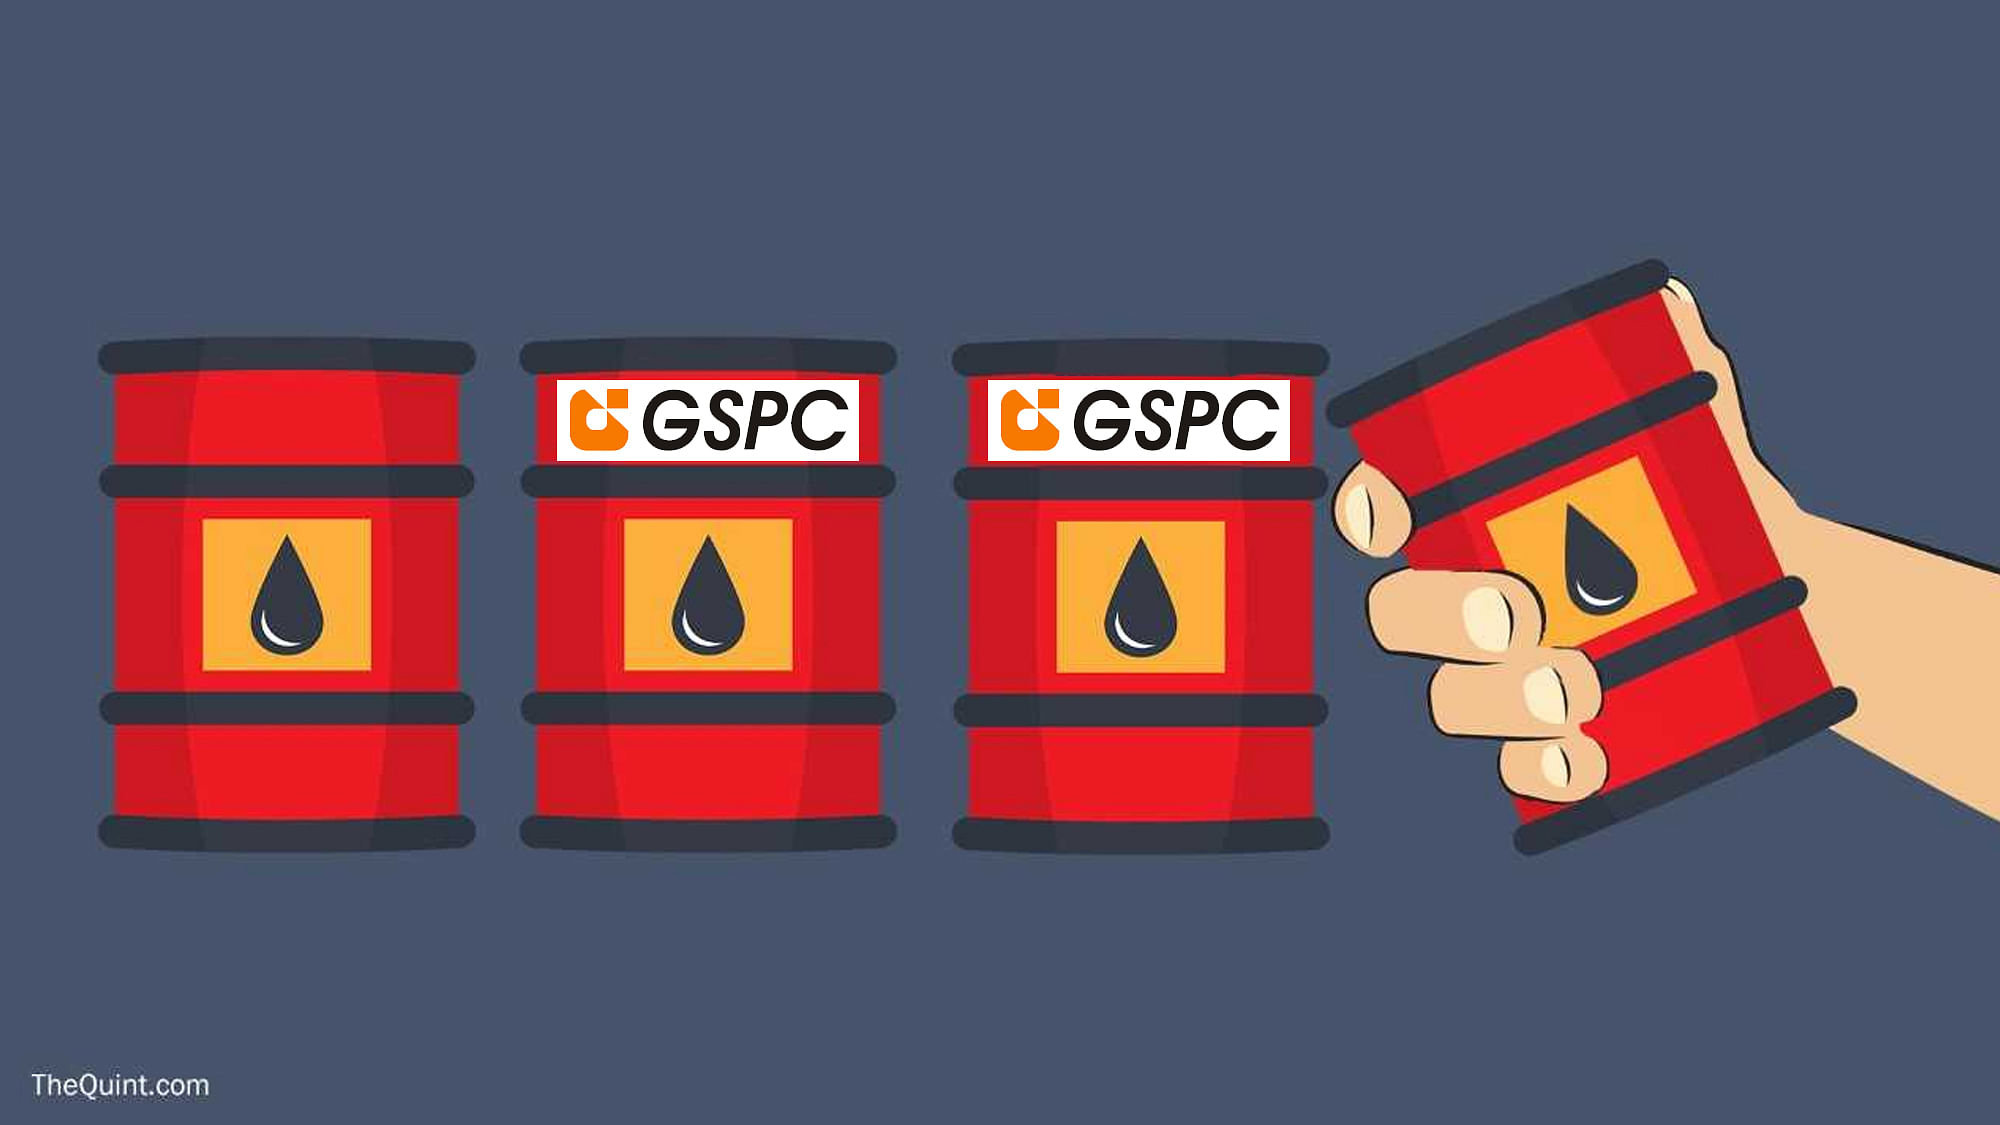 Probe agencies turned a blind eye to concerns over financial deals of the Gujarat State Petroleum Corporation.